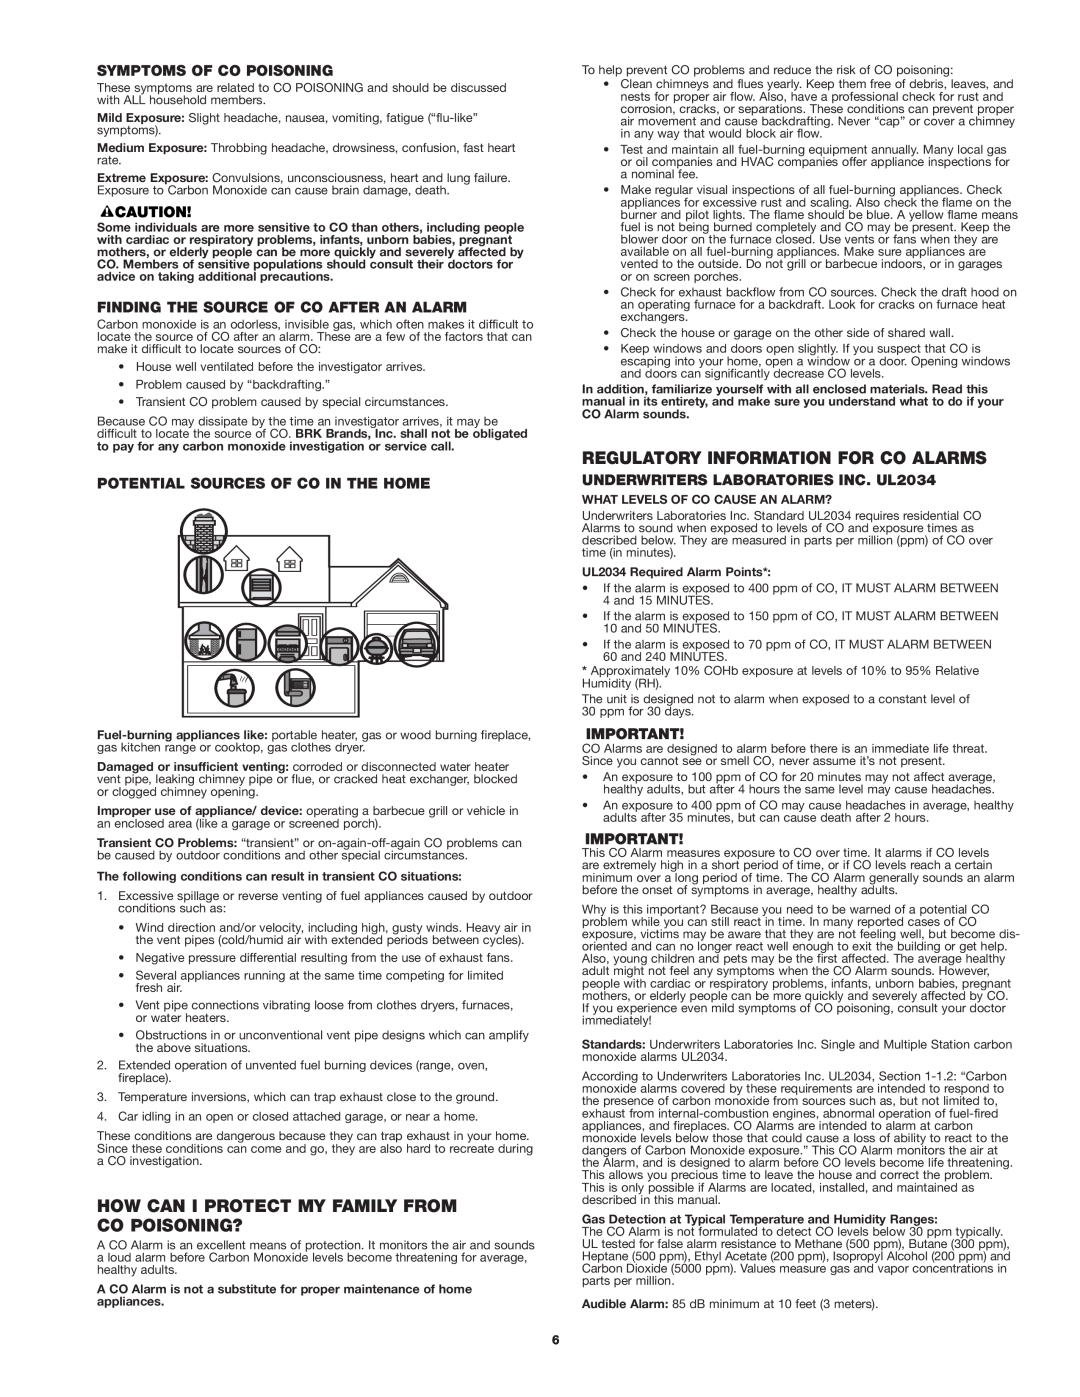 First Alert CO511CN user manual How Can I Protect My Family From Co Poisoning?, Regulatory Information For Co Alarms 